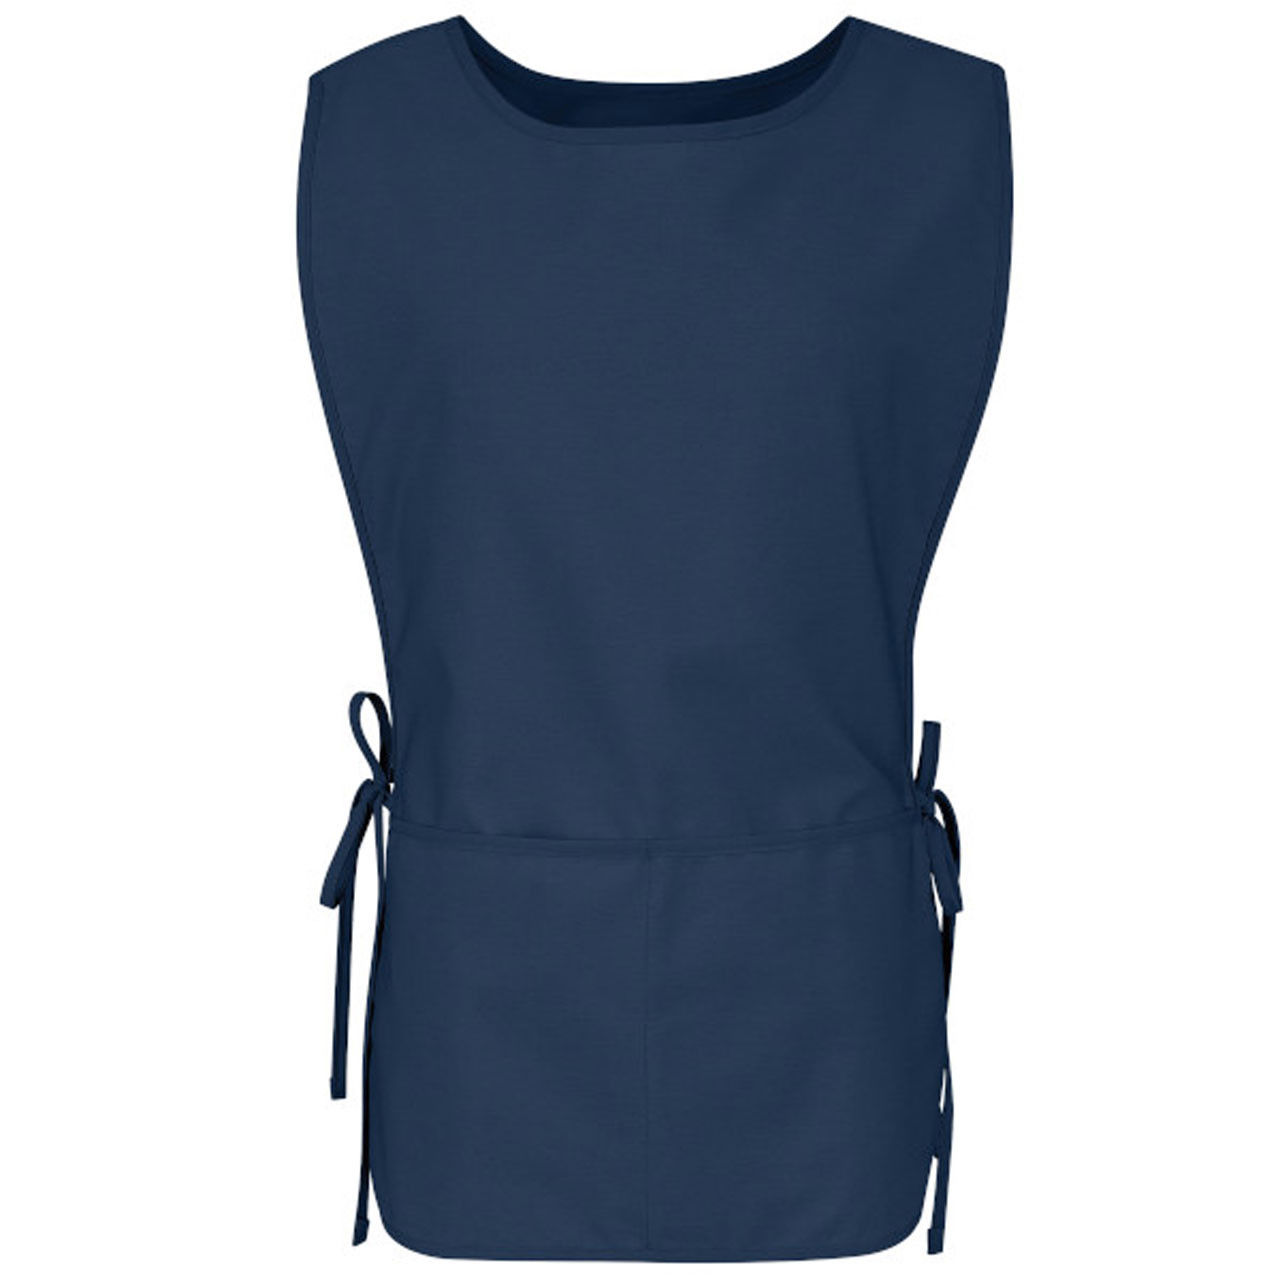 Is the Sturdy Cobbler Apron suitable for industrial use?